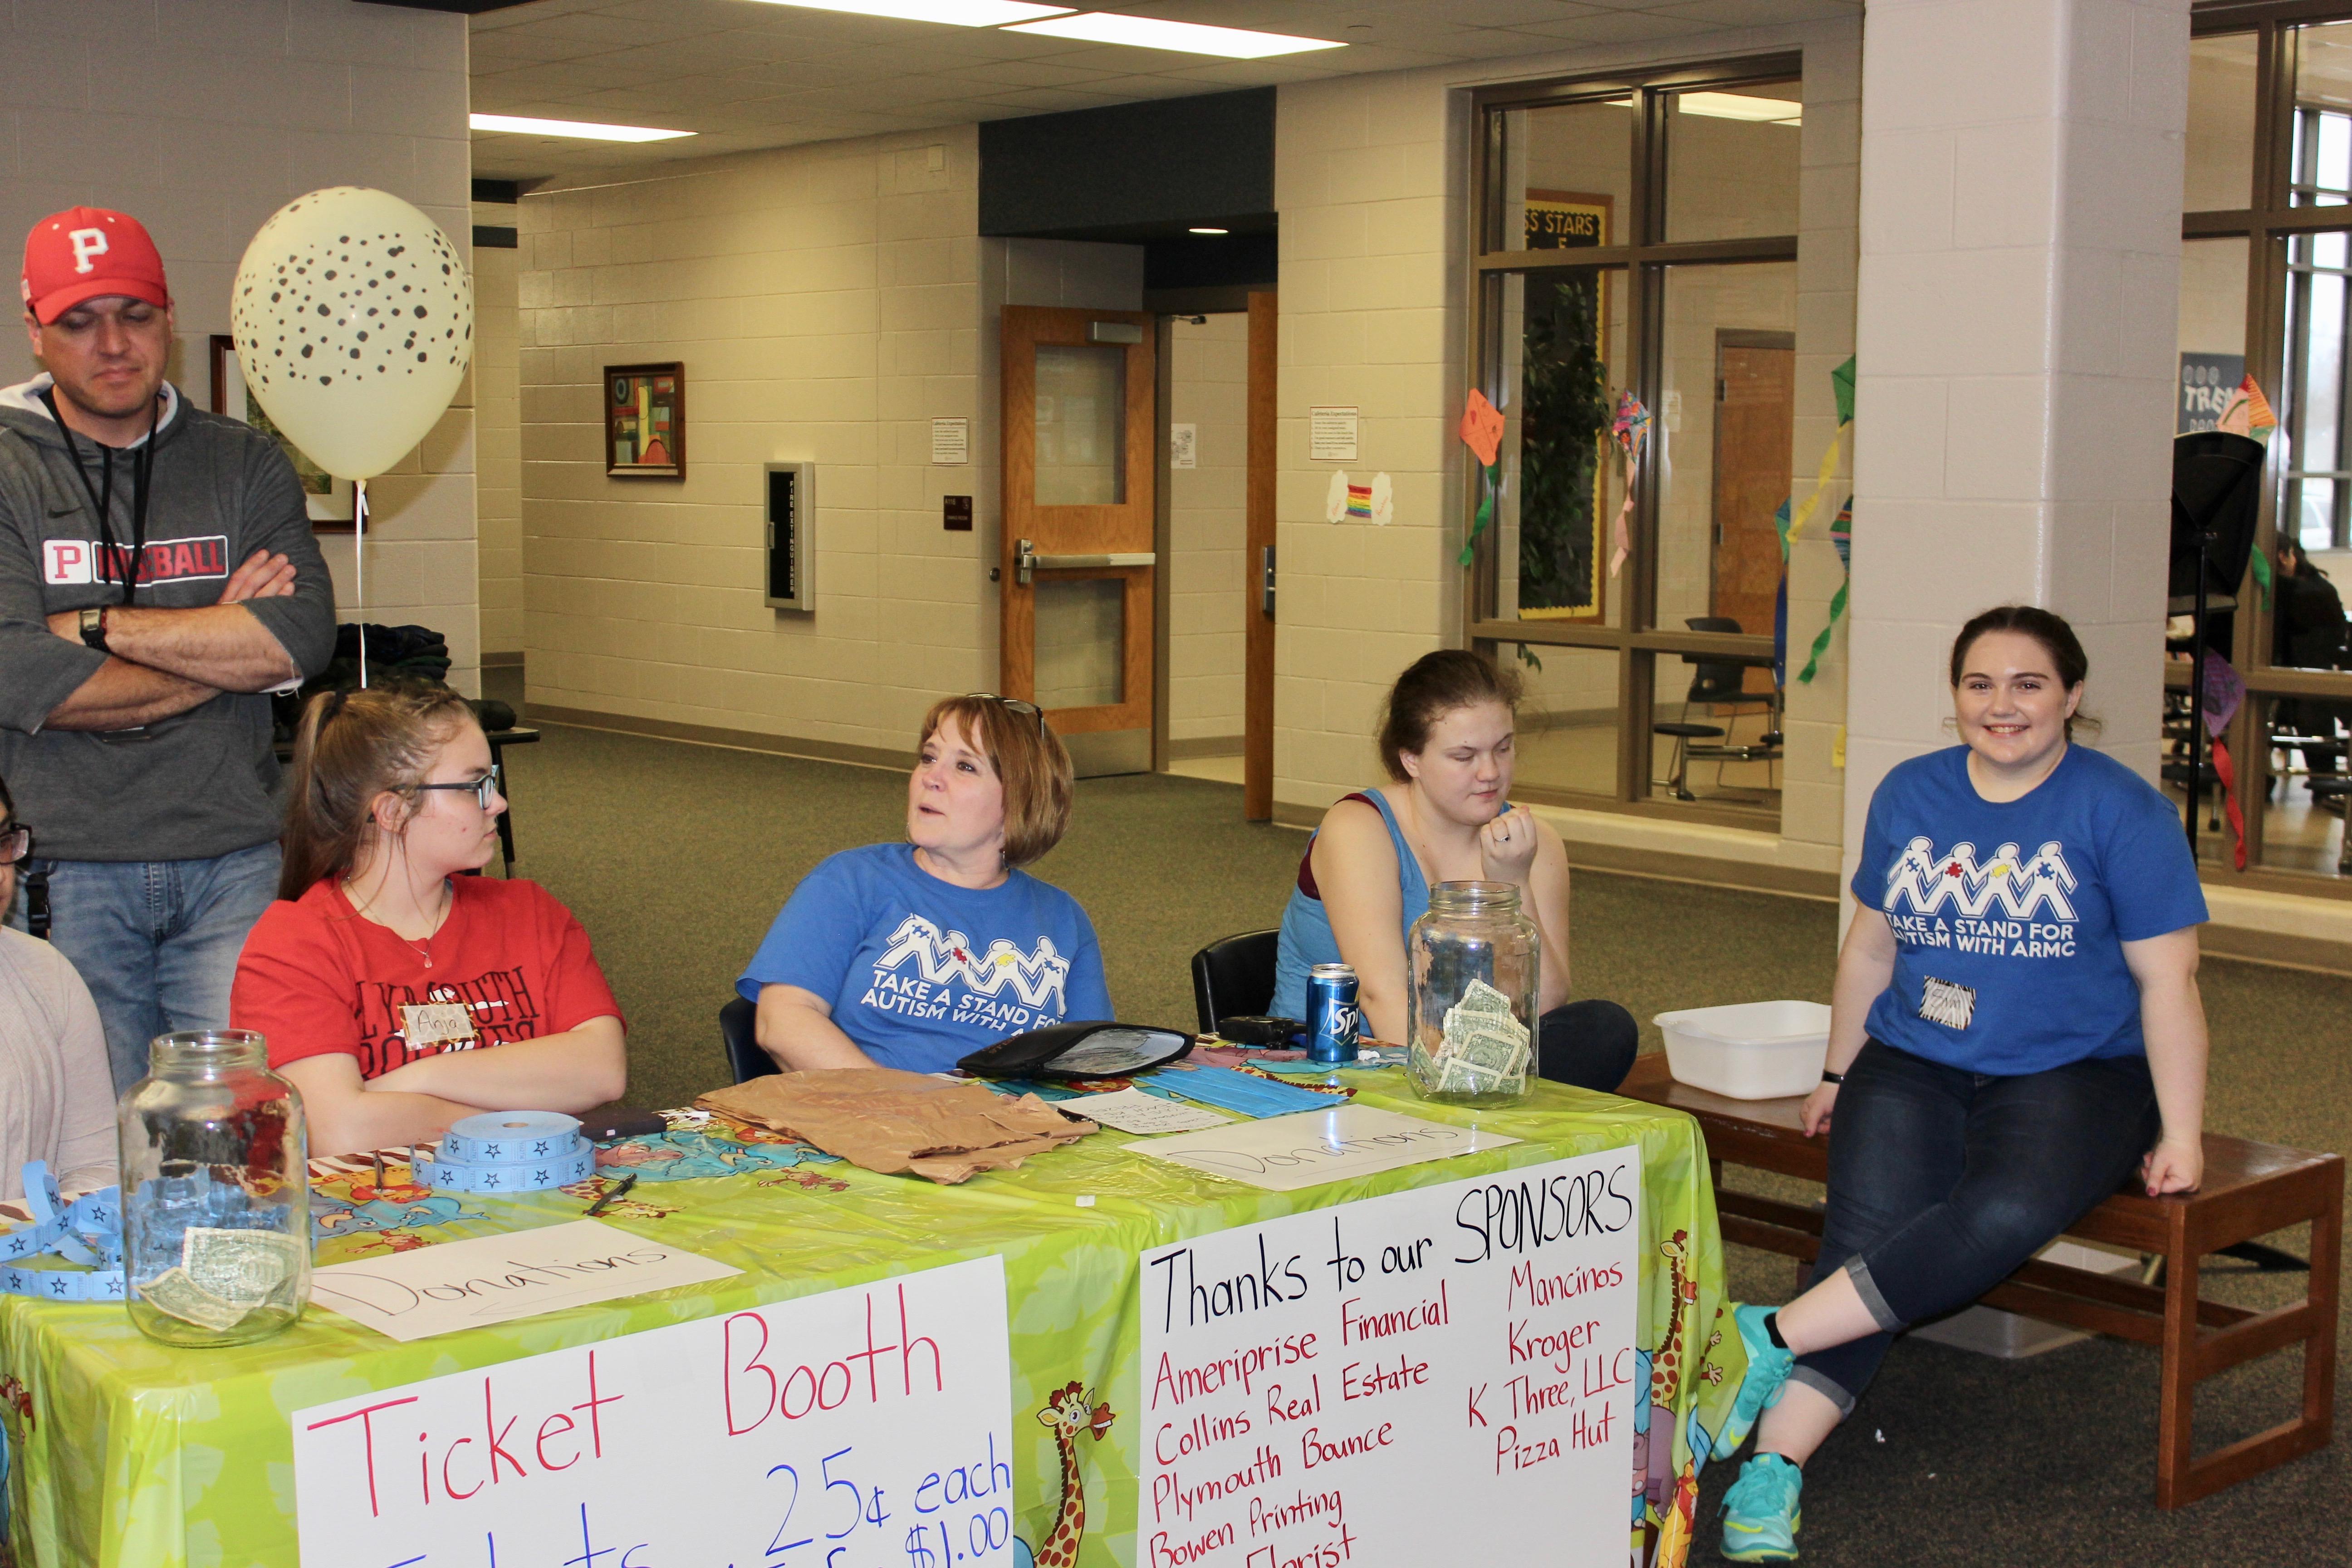 PHS students, Ryan Wolfe, Samantha and Teri Zechiel working welcome table.